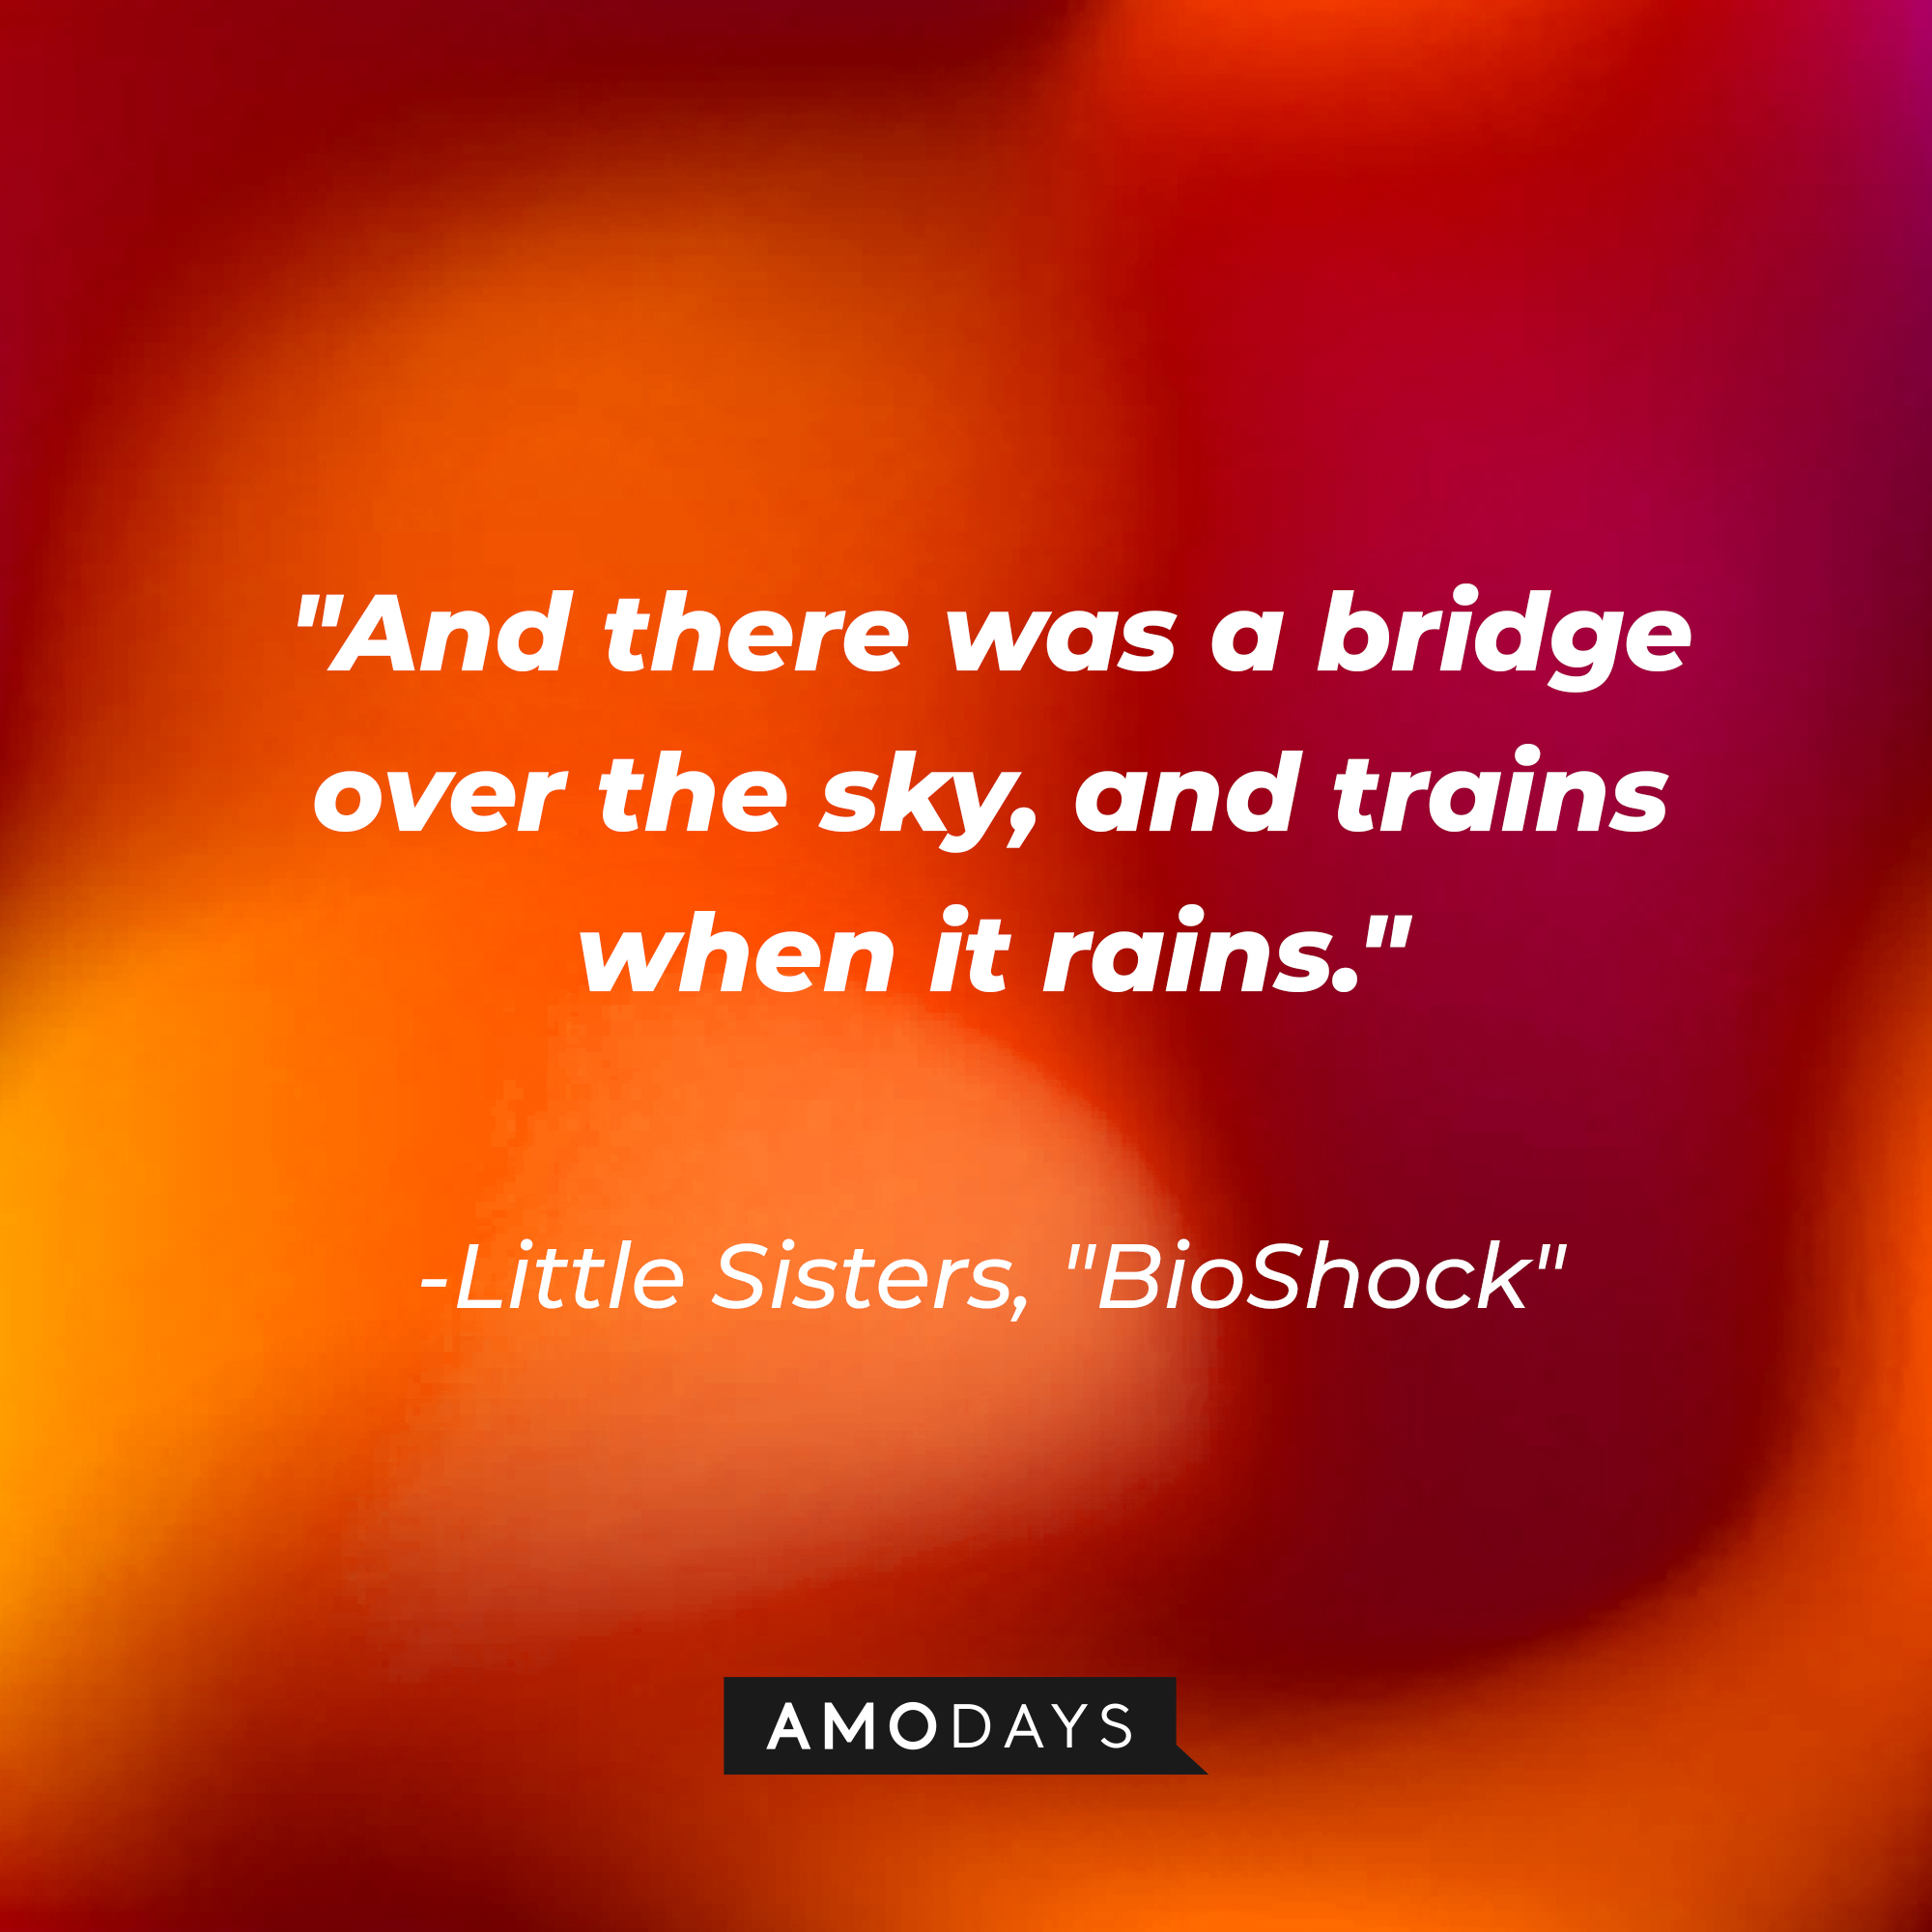 Little Sisters' quote from "BioShock:" "And there was a bridge over the sky, and trains when it rains." | Source: AmoDays